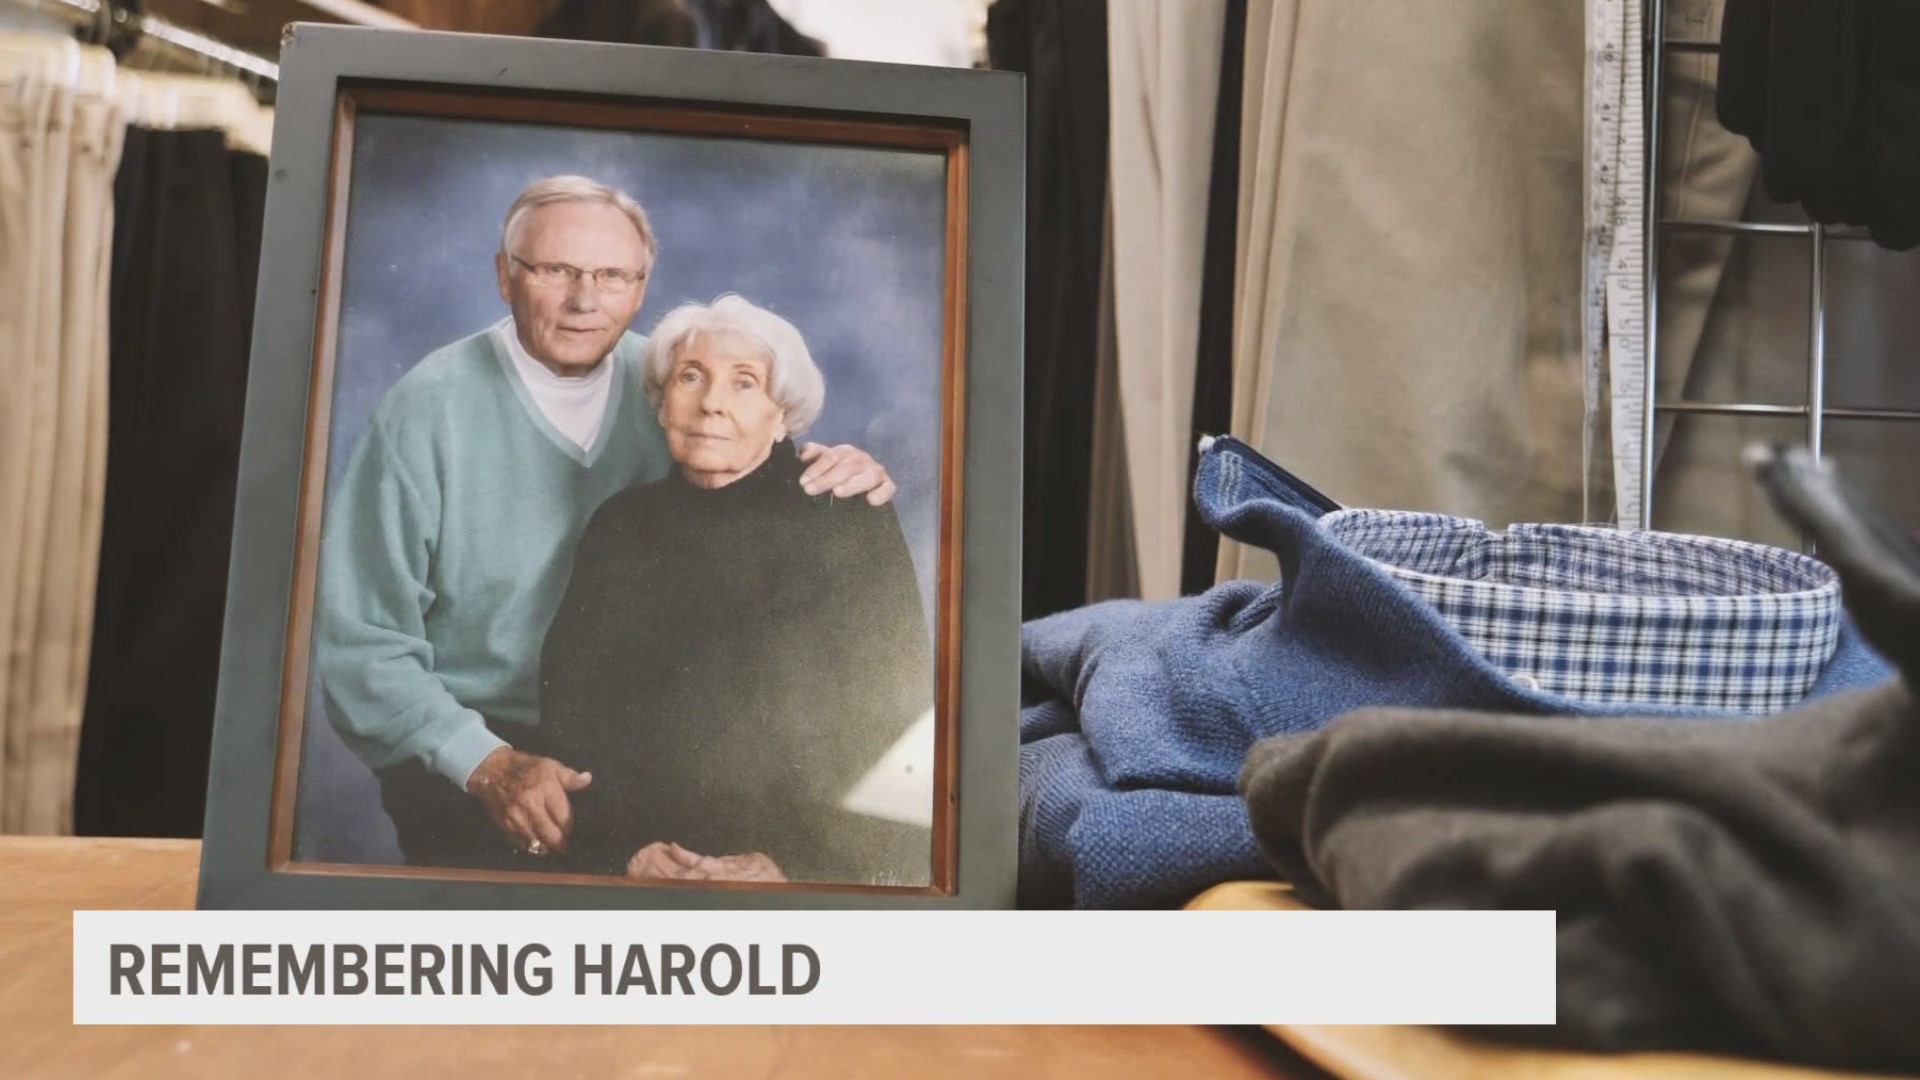 When Harold Junkman passed away from COVID-19, there were no final words - until his son checked a cell phone days after he passed.